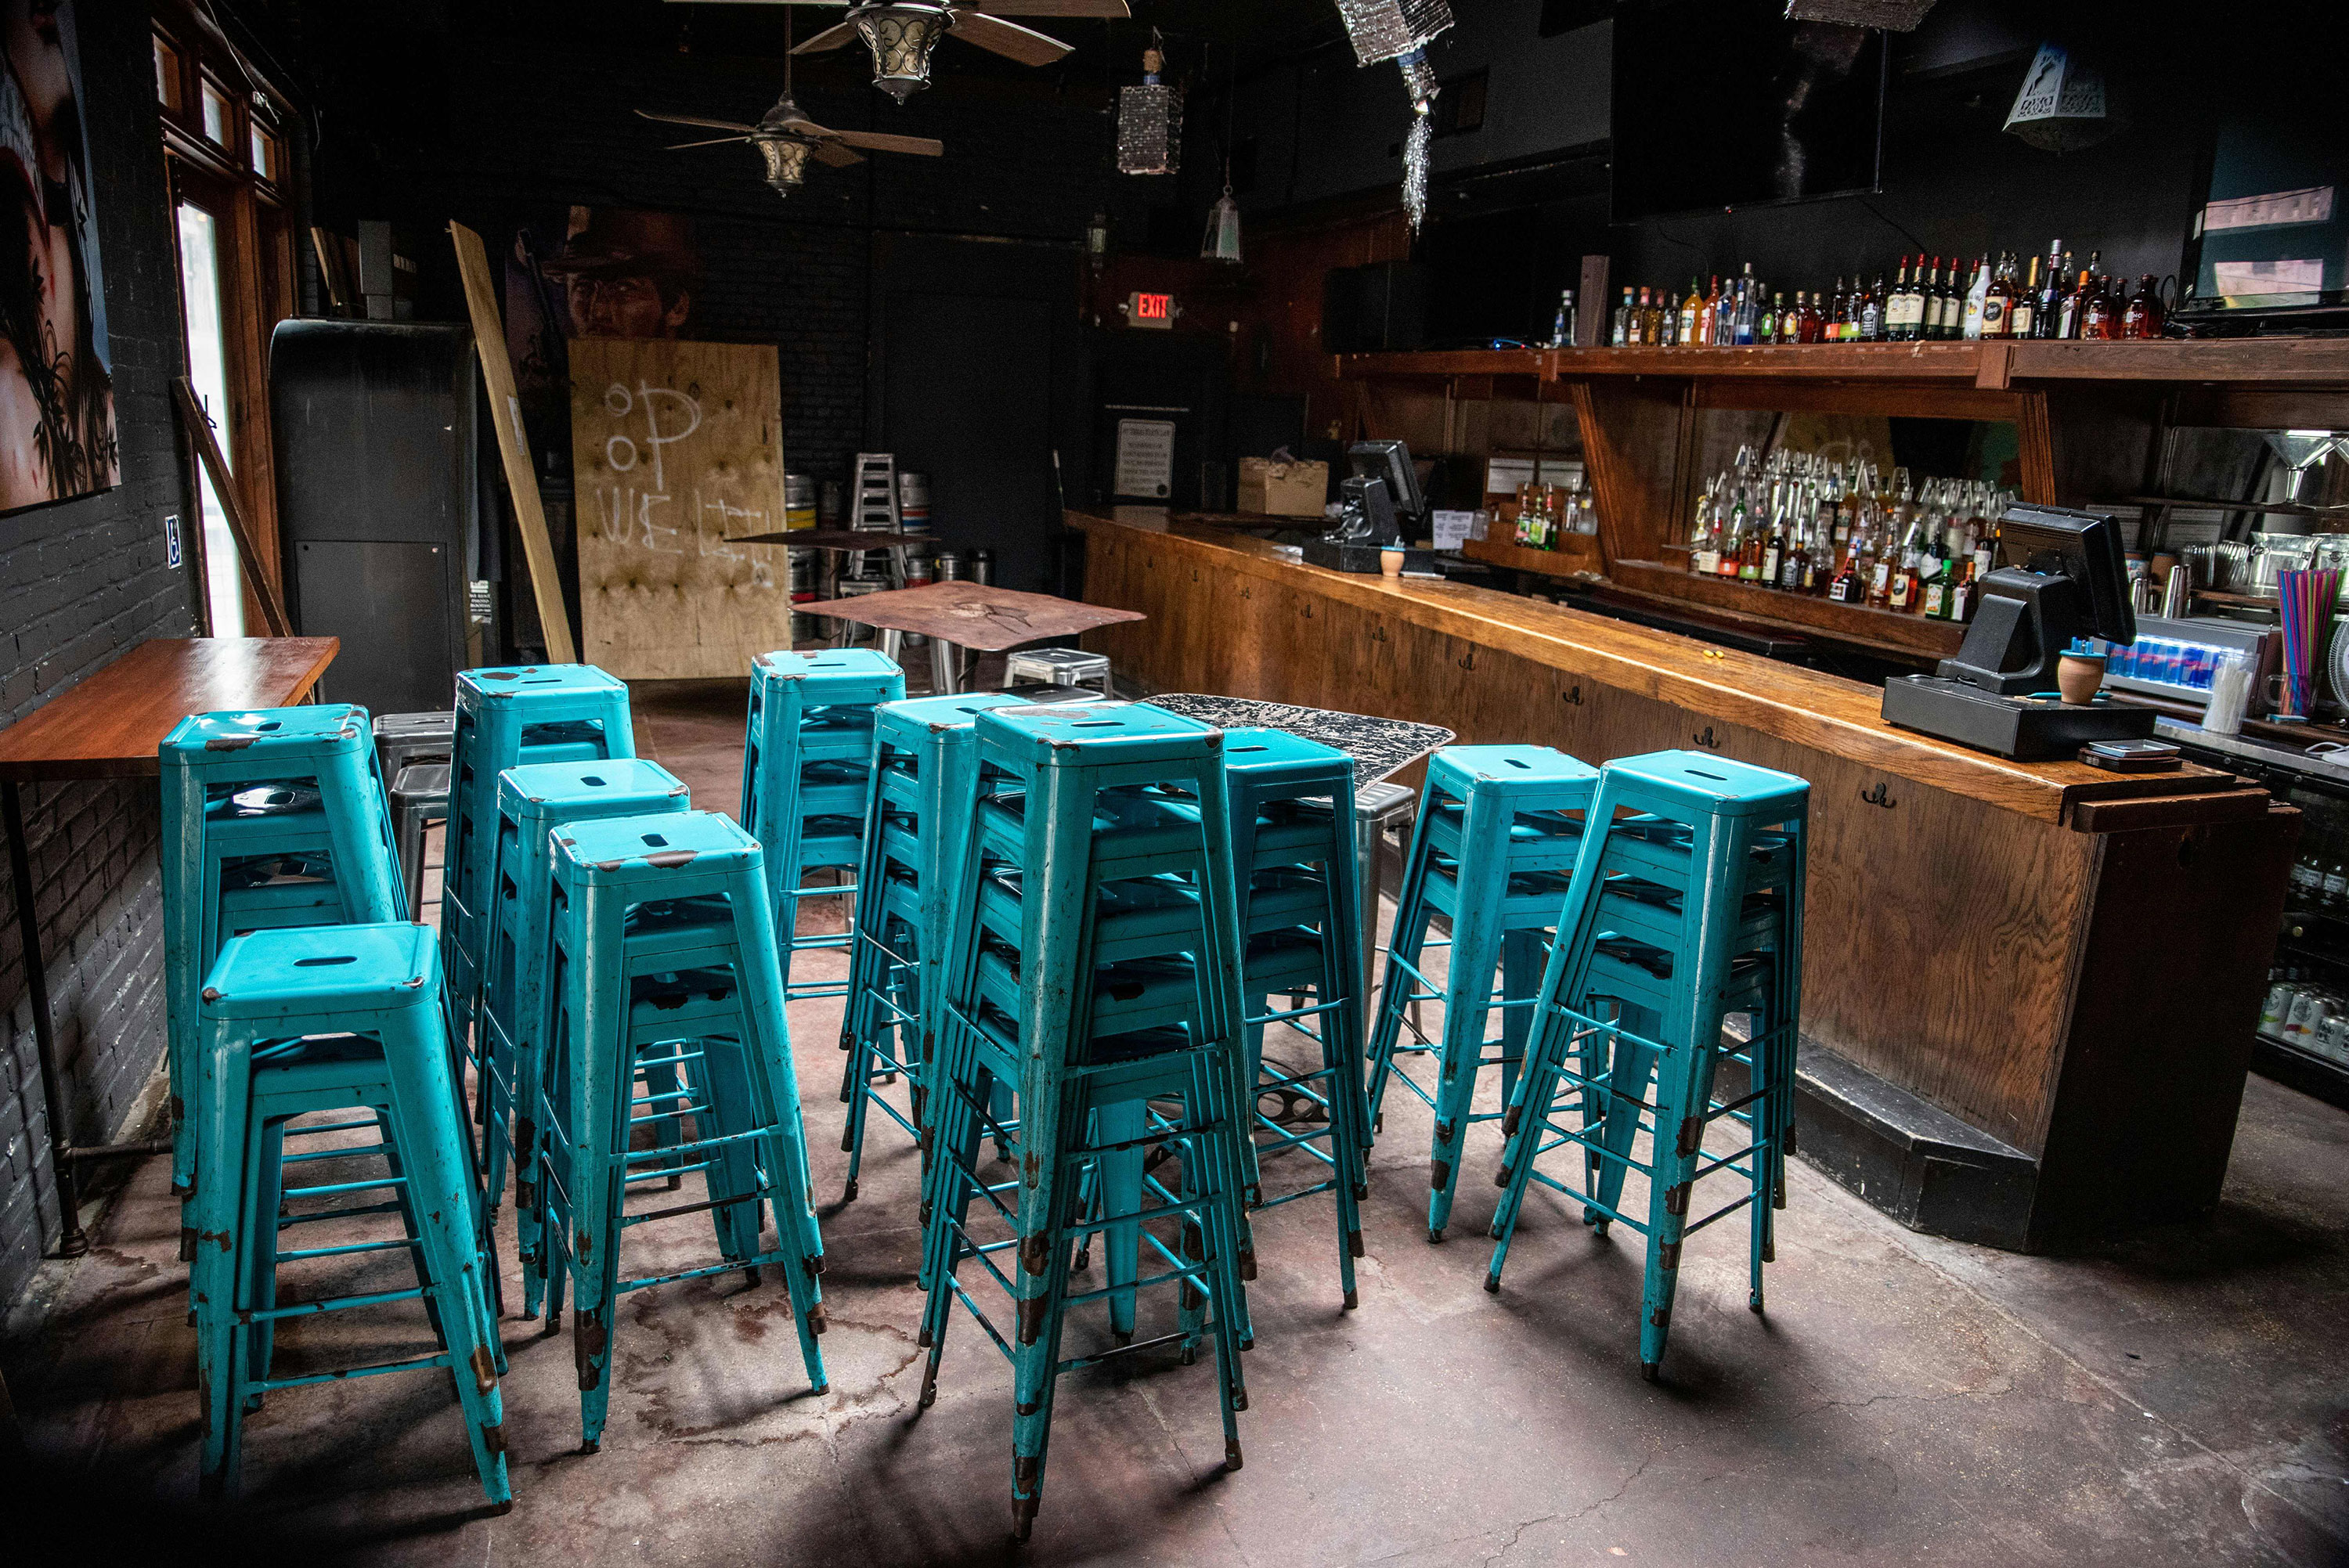 Stools sit stacked inside a closed bar in Austin, Texas, on June 26.